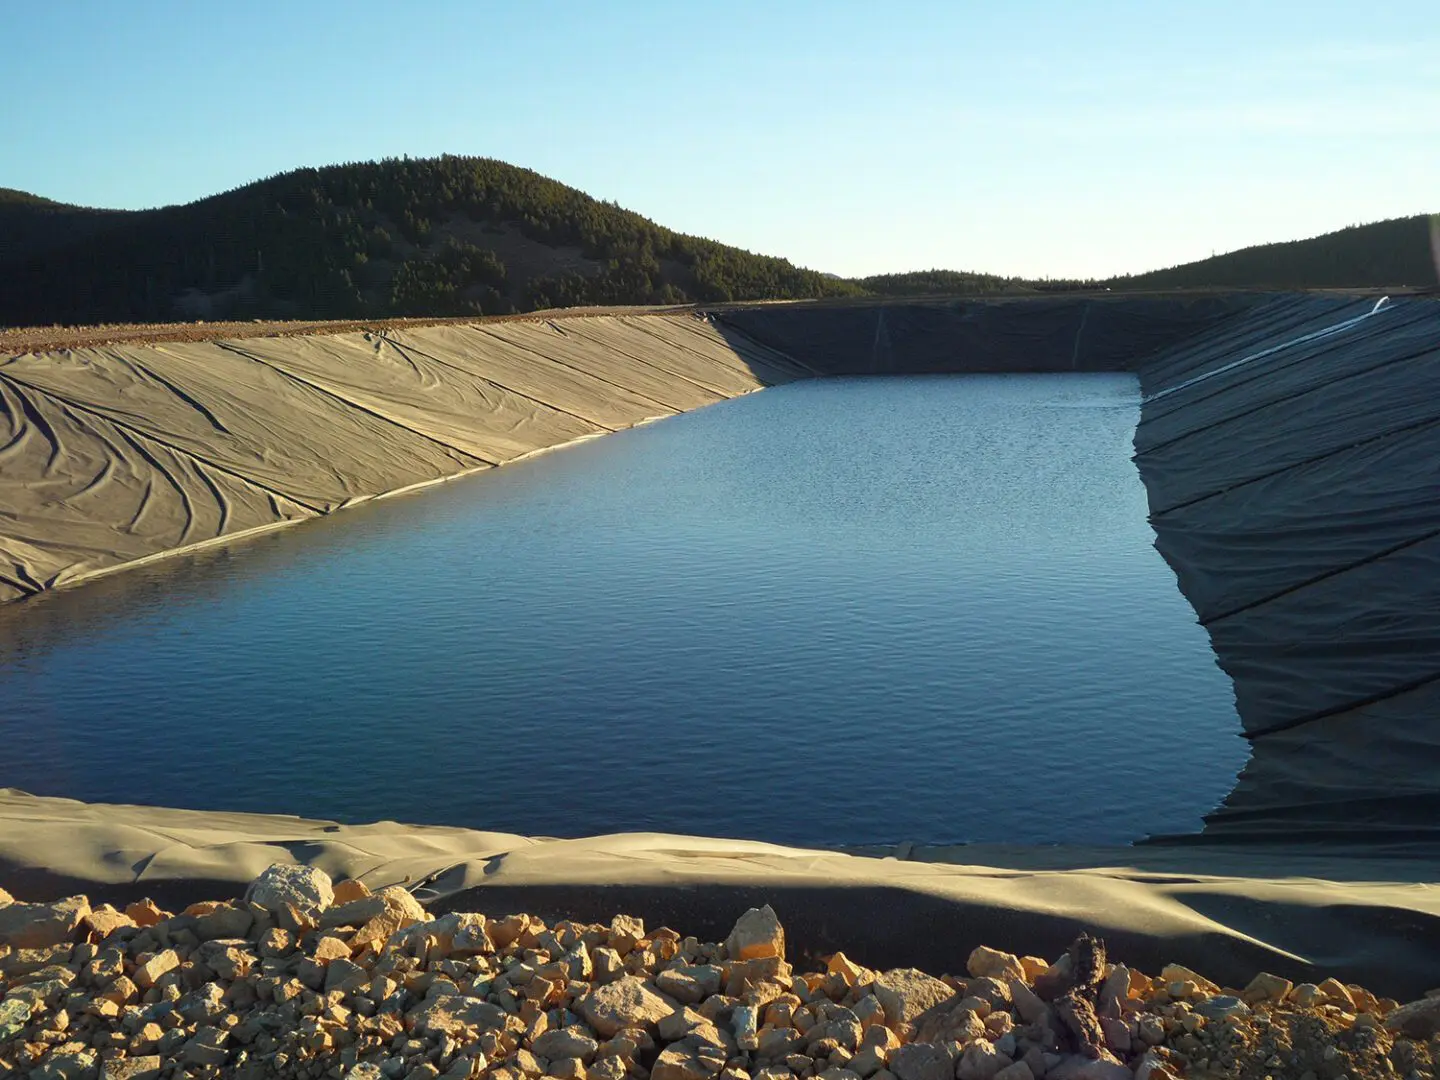 A body of water with rocks and hills in the background.